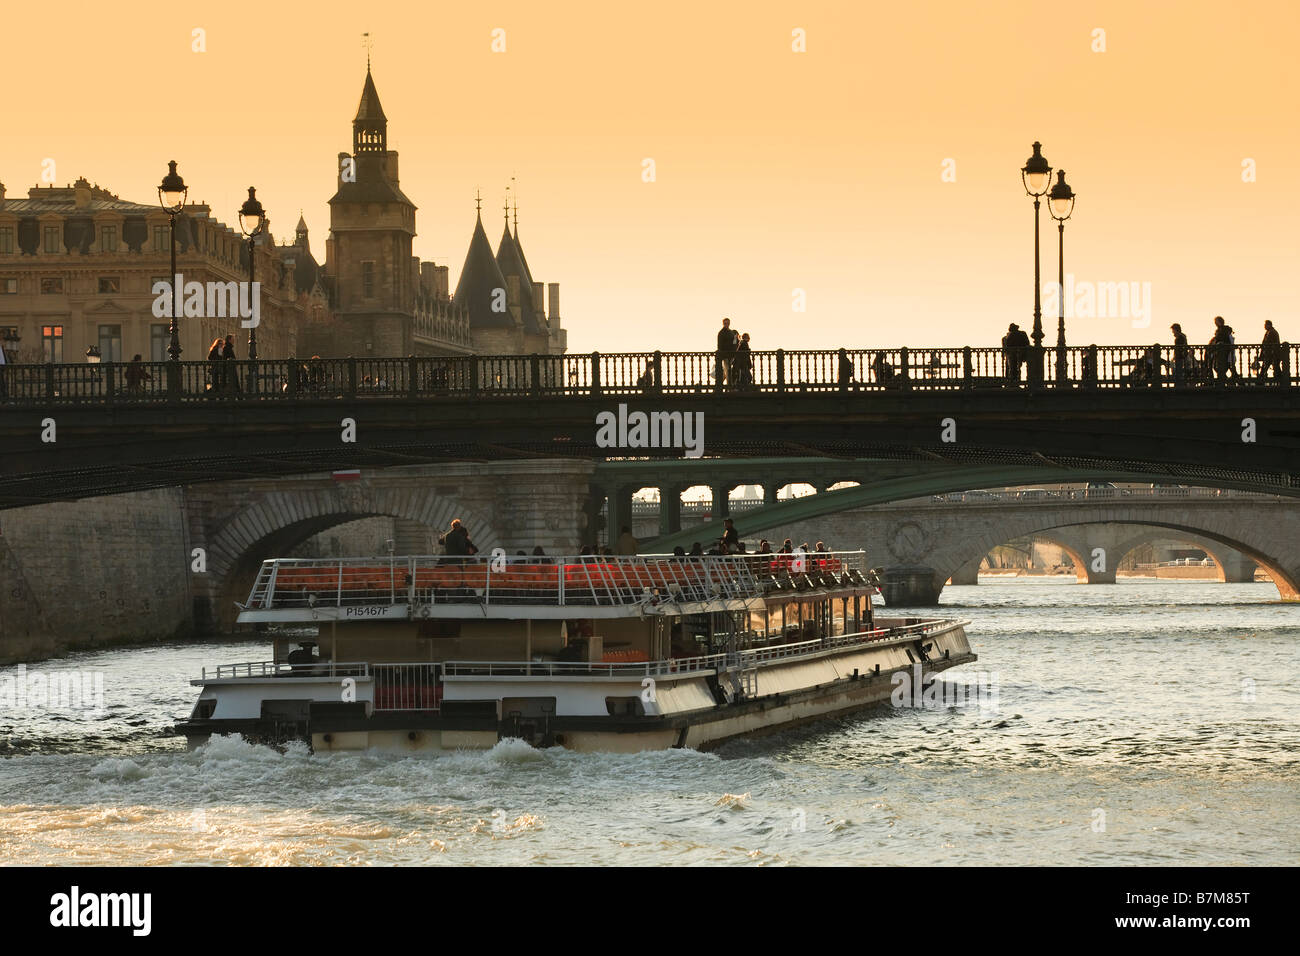 TOUR BOAT ON THE RIVER SEINE PARIS AT SUNSET Stock Photo